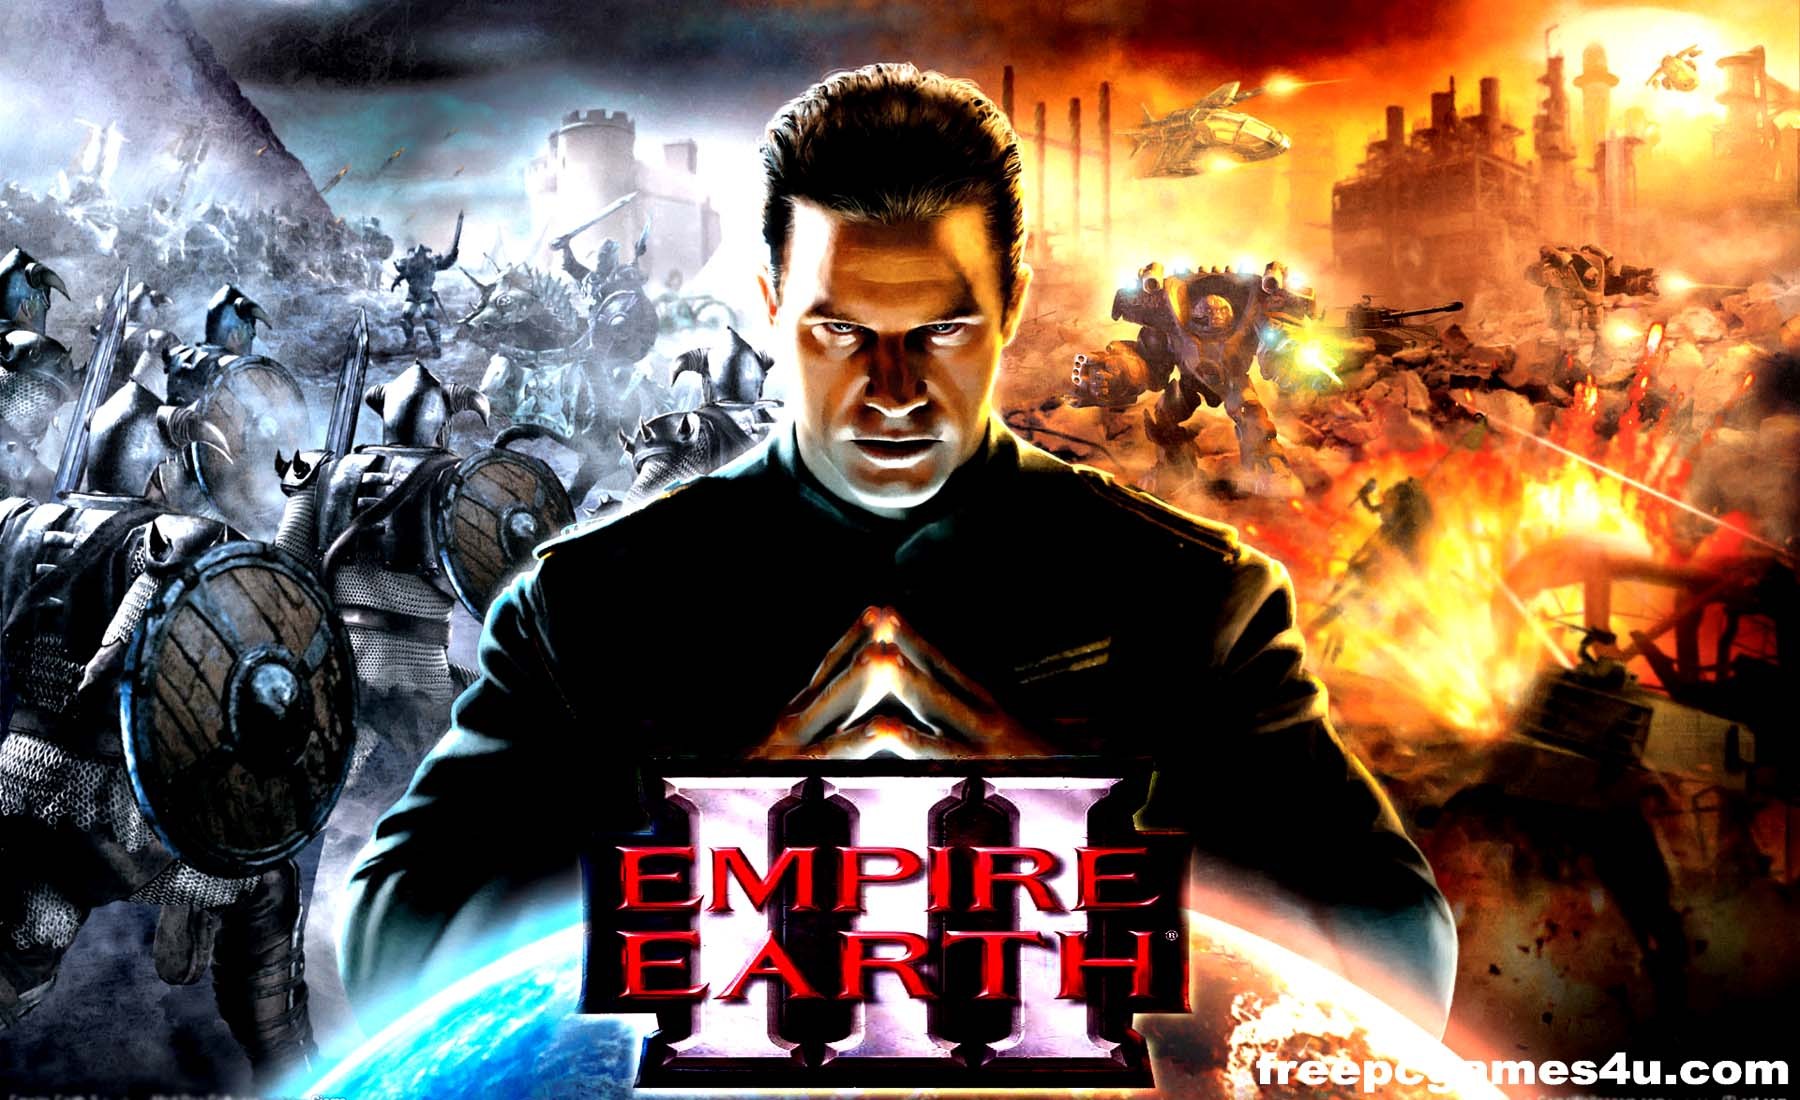 Free download game pc empire earth 2 full version full